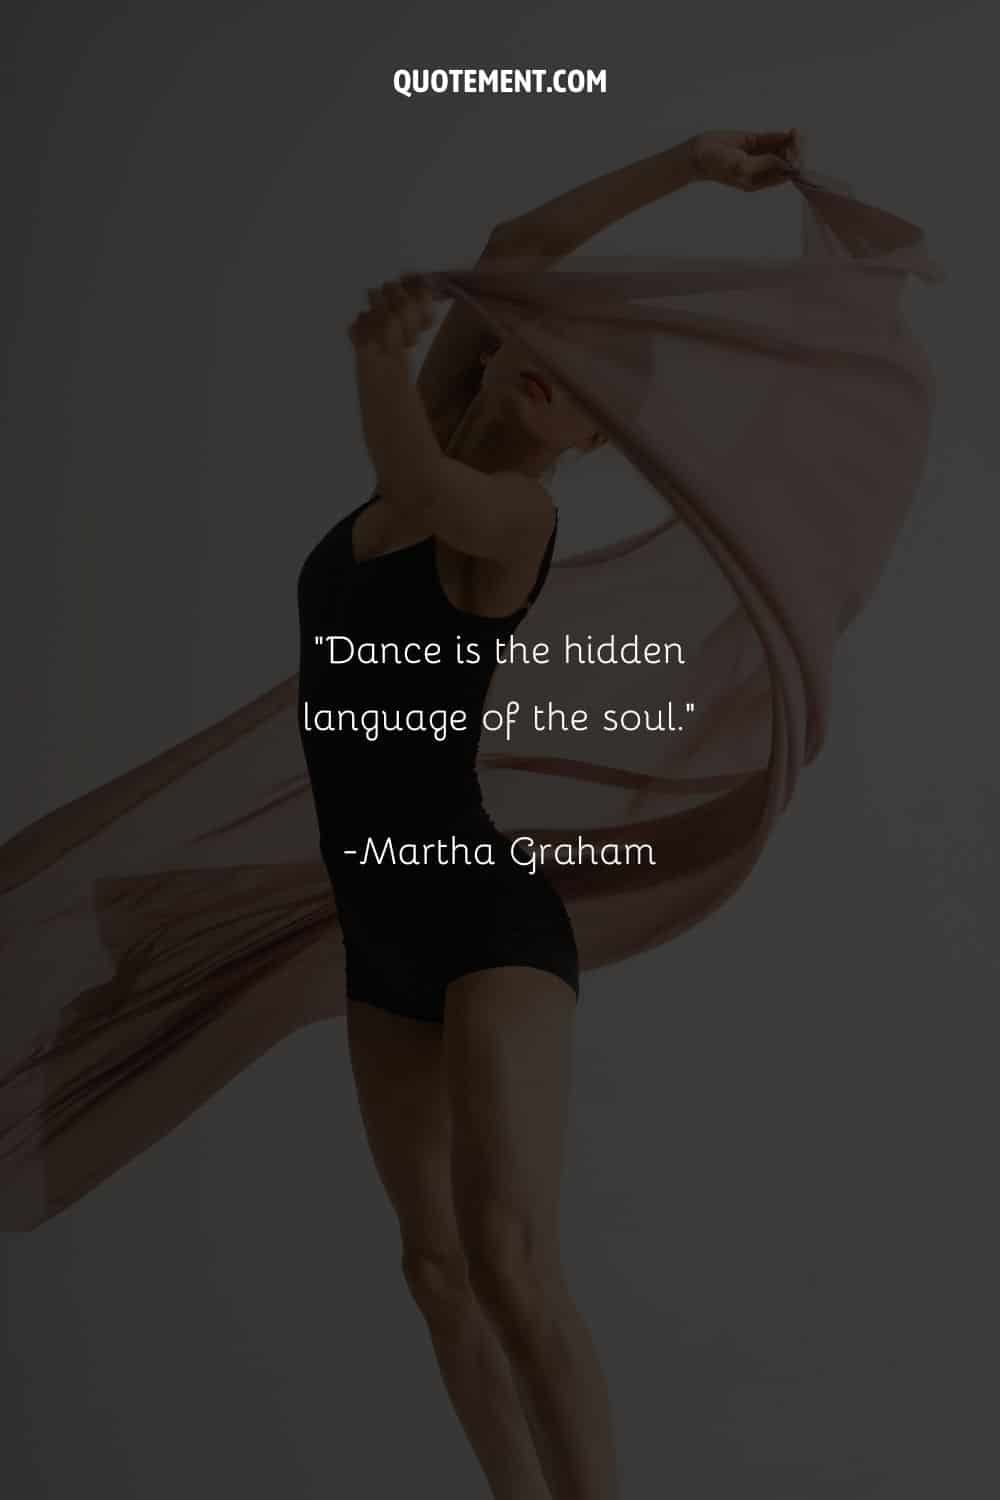 ballerina wearing black and a silk scarf representing dancing quote